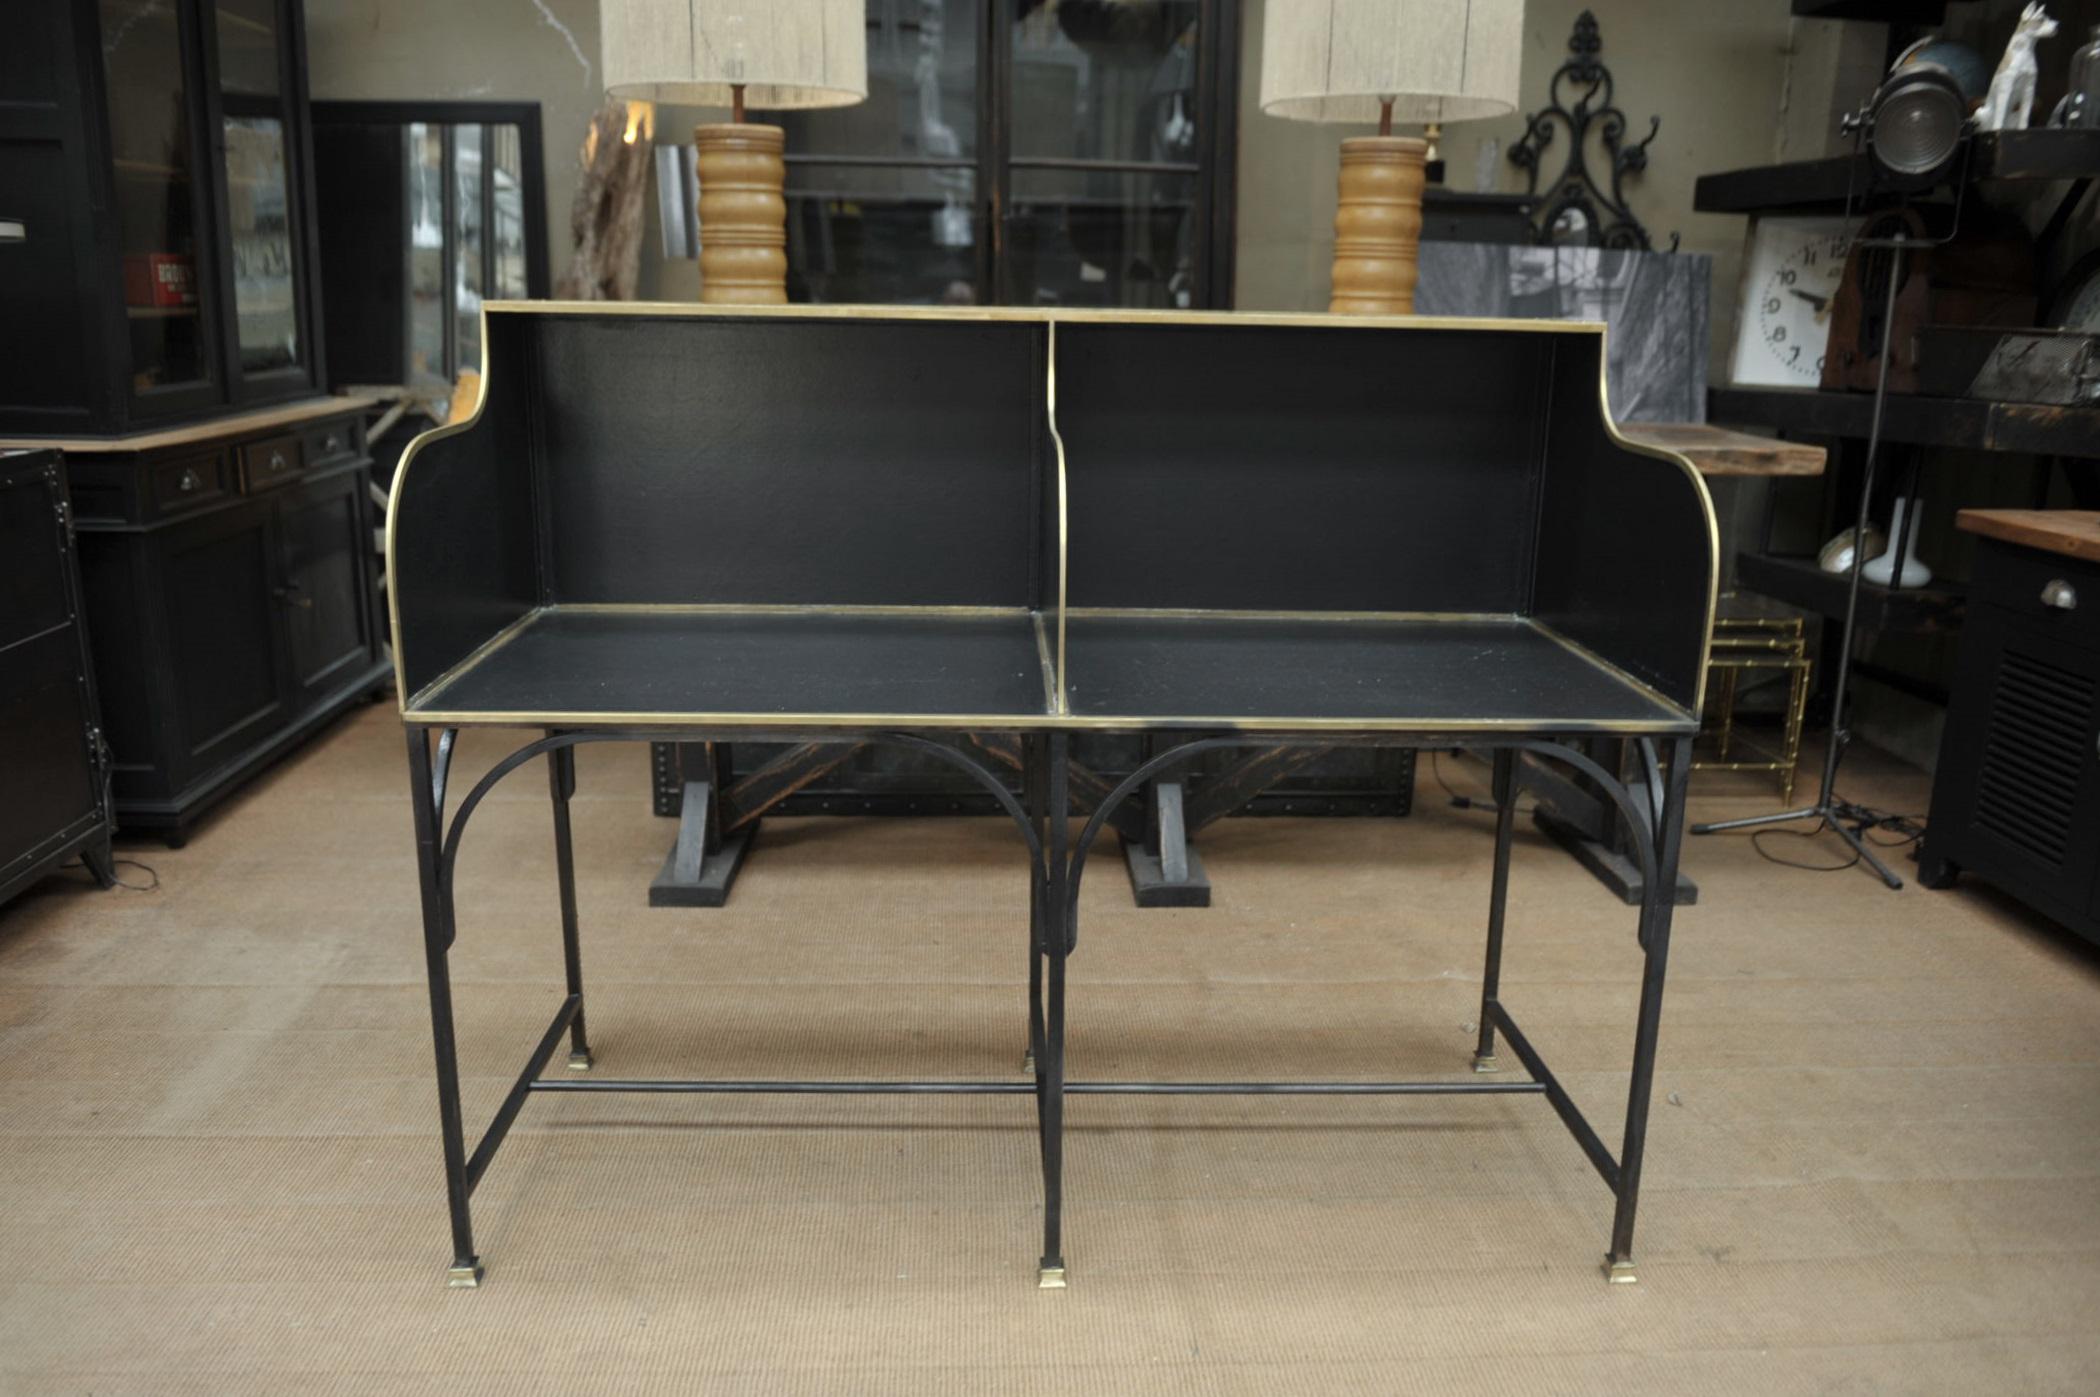 Iron double seat metal and brass bank desk counter circa 1910 original black color. Height of working top 76 cm 29.92 inches.
 